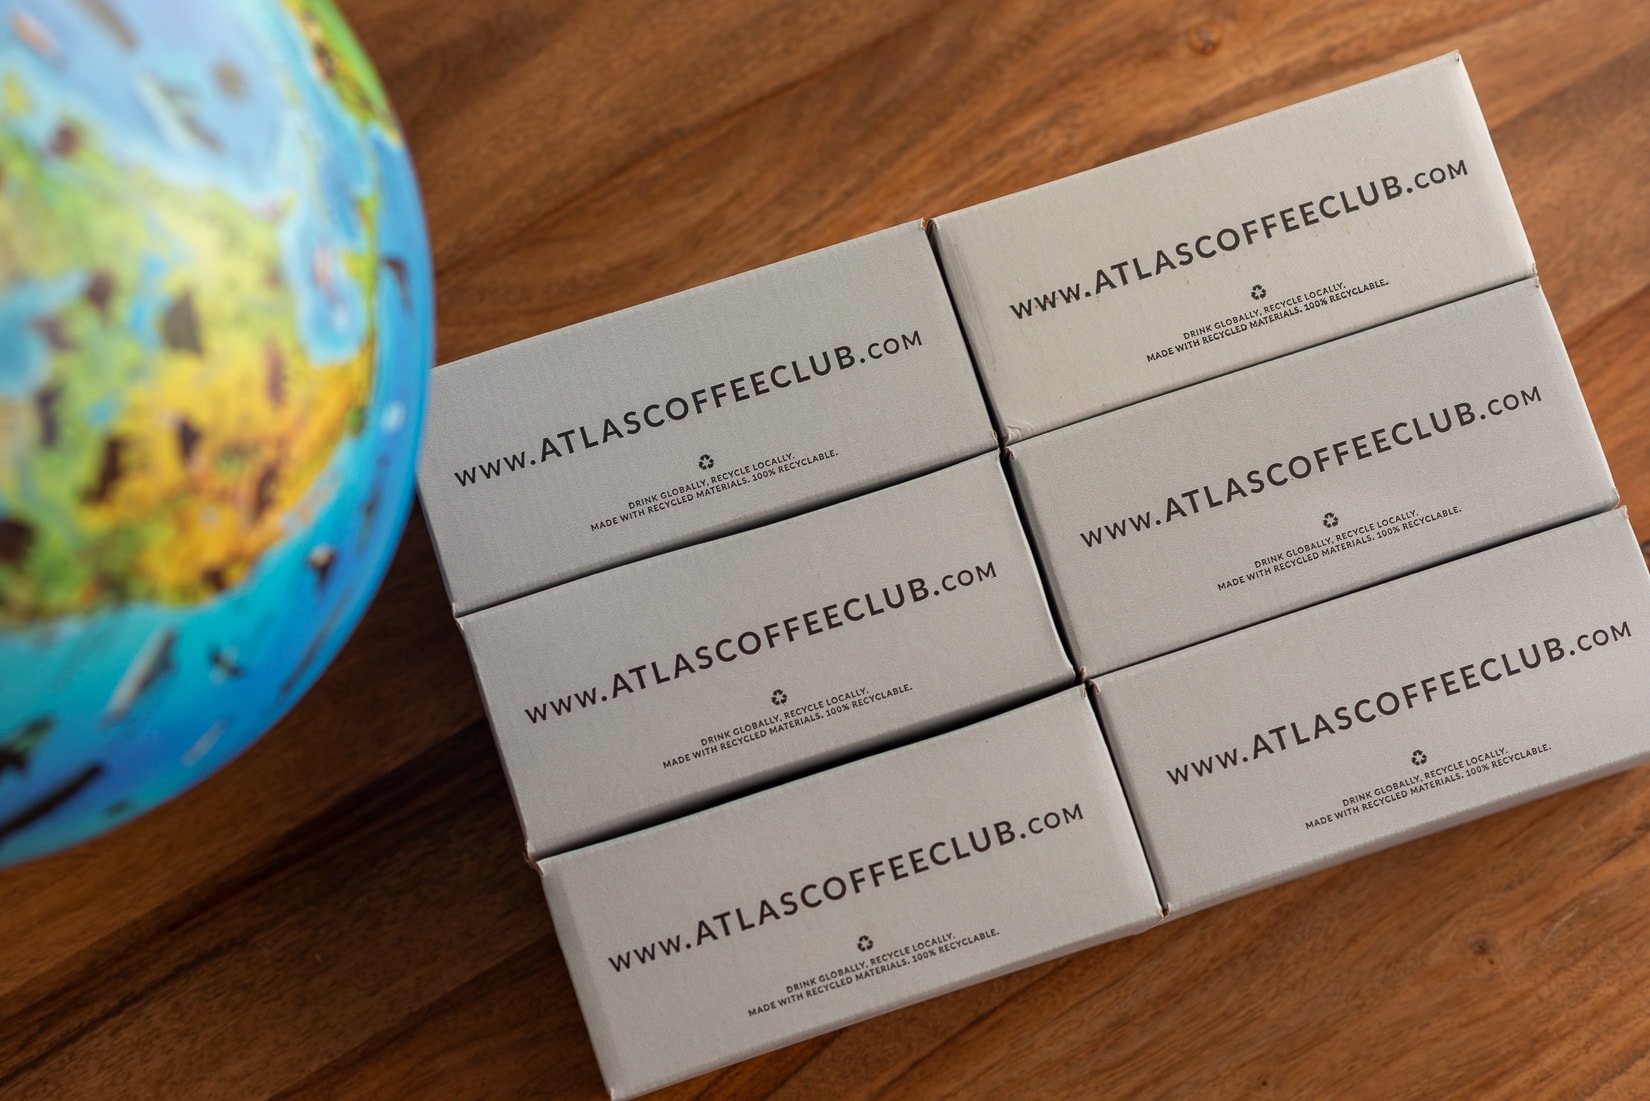 Atlas Coffee Club subscription review package - Luxe Digital